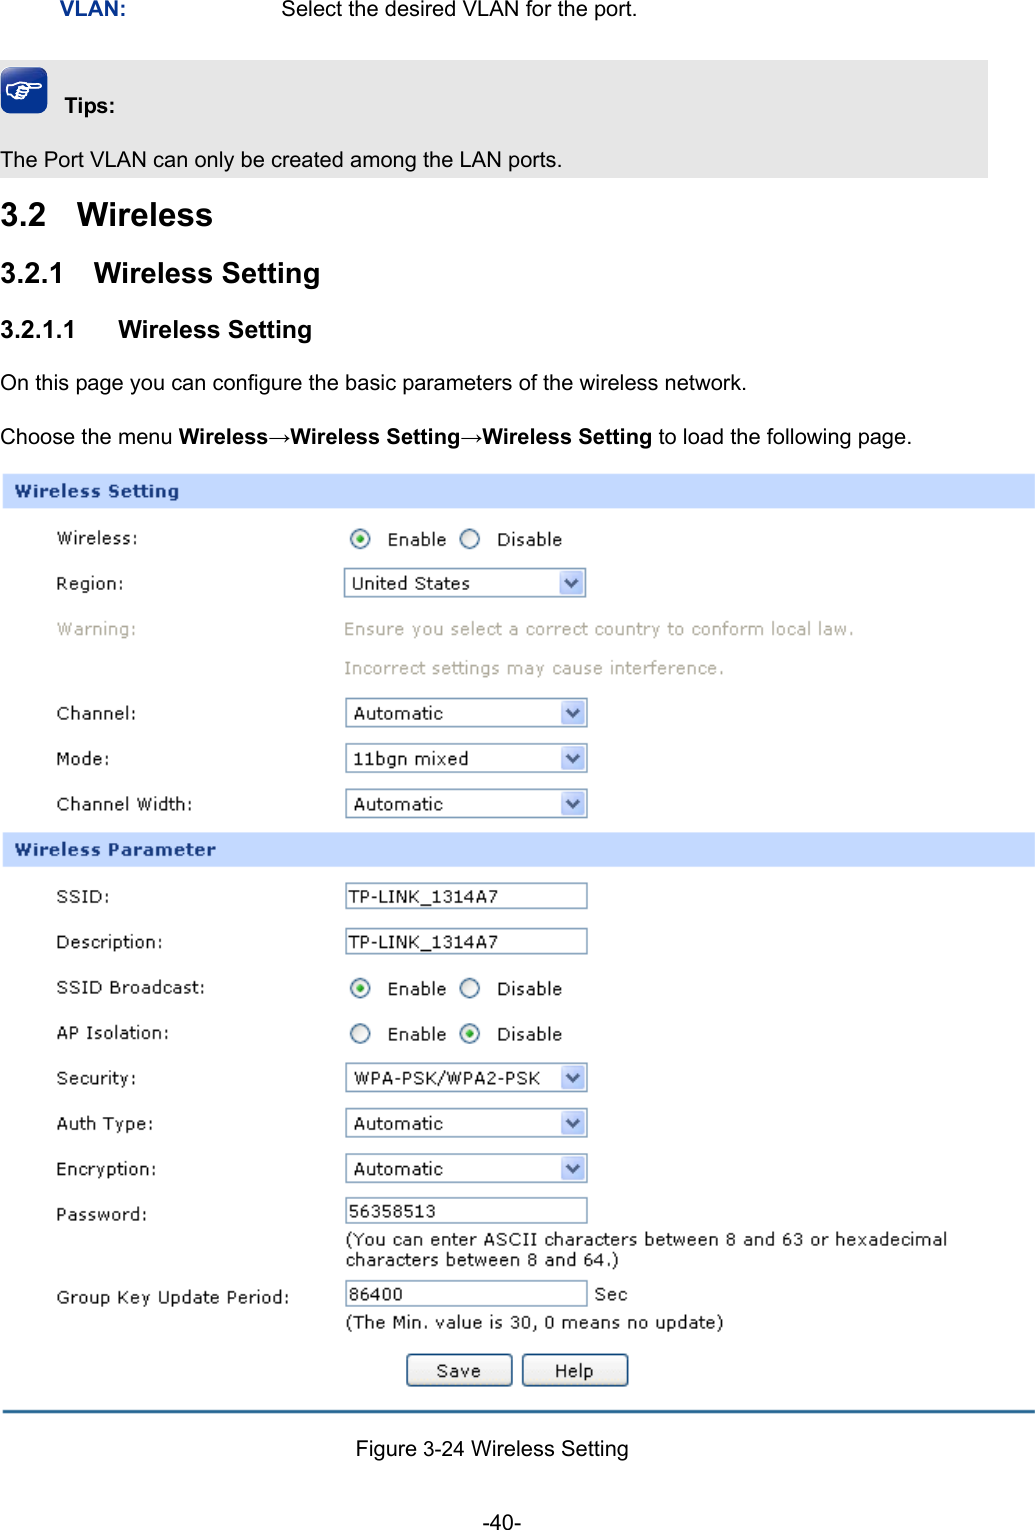  -40- VLAN:  Select the desired VLAN for the port. Tips: The Port VLAN can only be created among the LAN ports. 3.2  Wireless 3.2.1  Wireless Setting 3.2.1.1  Wireless Setting On this page you can configure the basic parameters of the wireless network. Choose the menu Wireless→Wireless Setting→Wireless Setting to load the following page.  Figure 3-24 Wireless Setting 